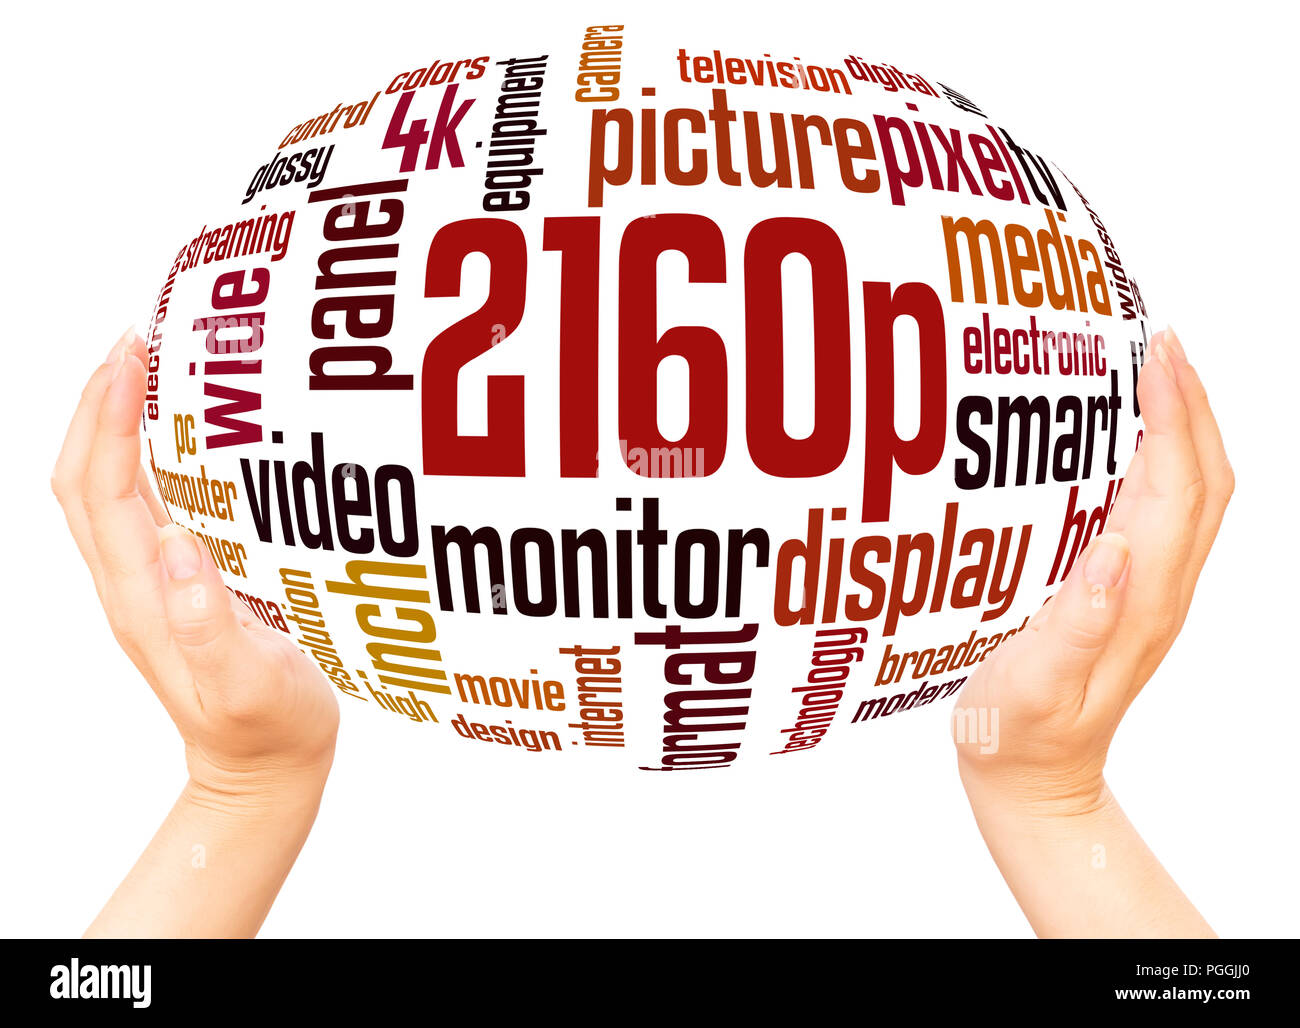 2160p screen resolution word cloud hand sphere concept on white background. Stock Photo